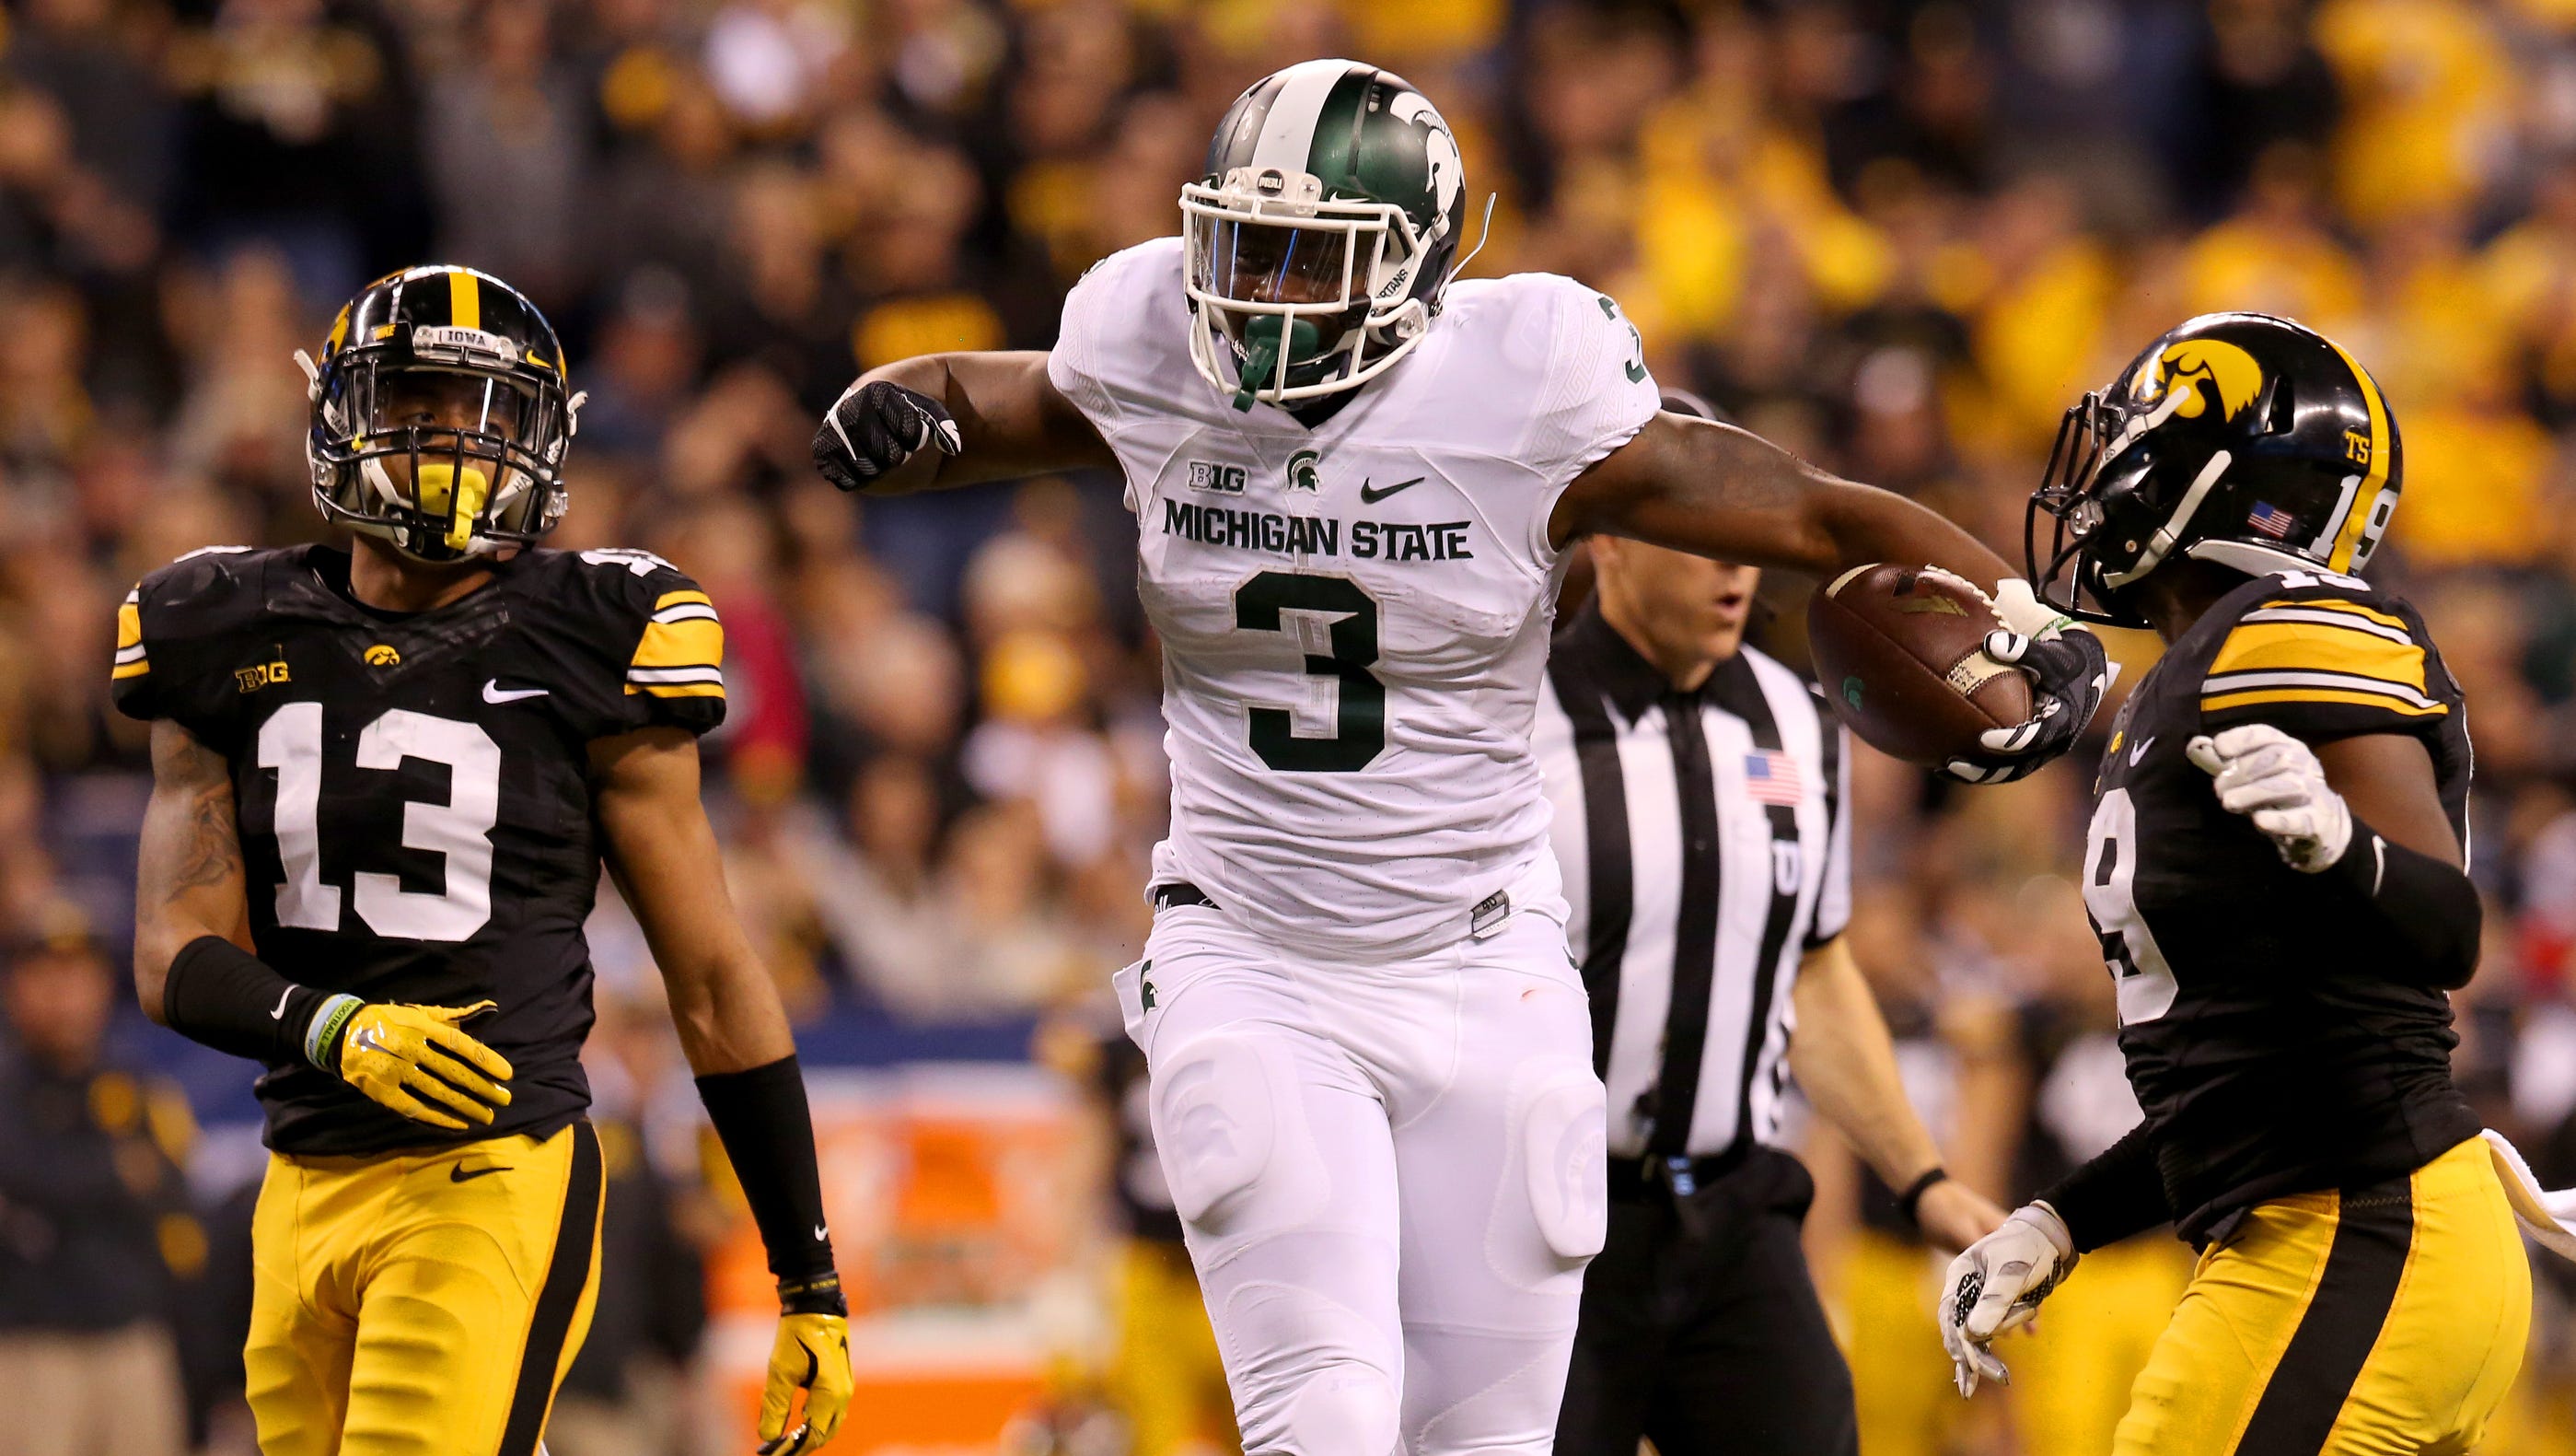 Michigan State running back LJ Scott (3) shows his excitement after getting a first down against Iowa during the Big Ten Championship Game at Lucas Oil Stadium on Dec. 5, 2015.